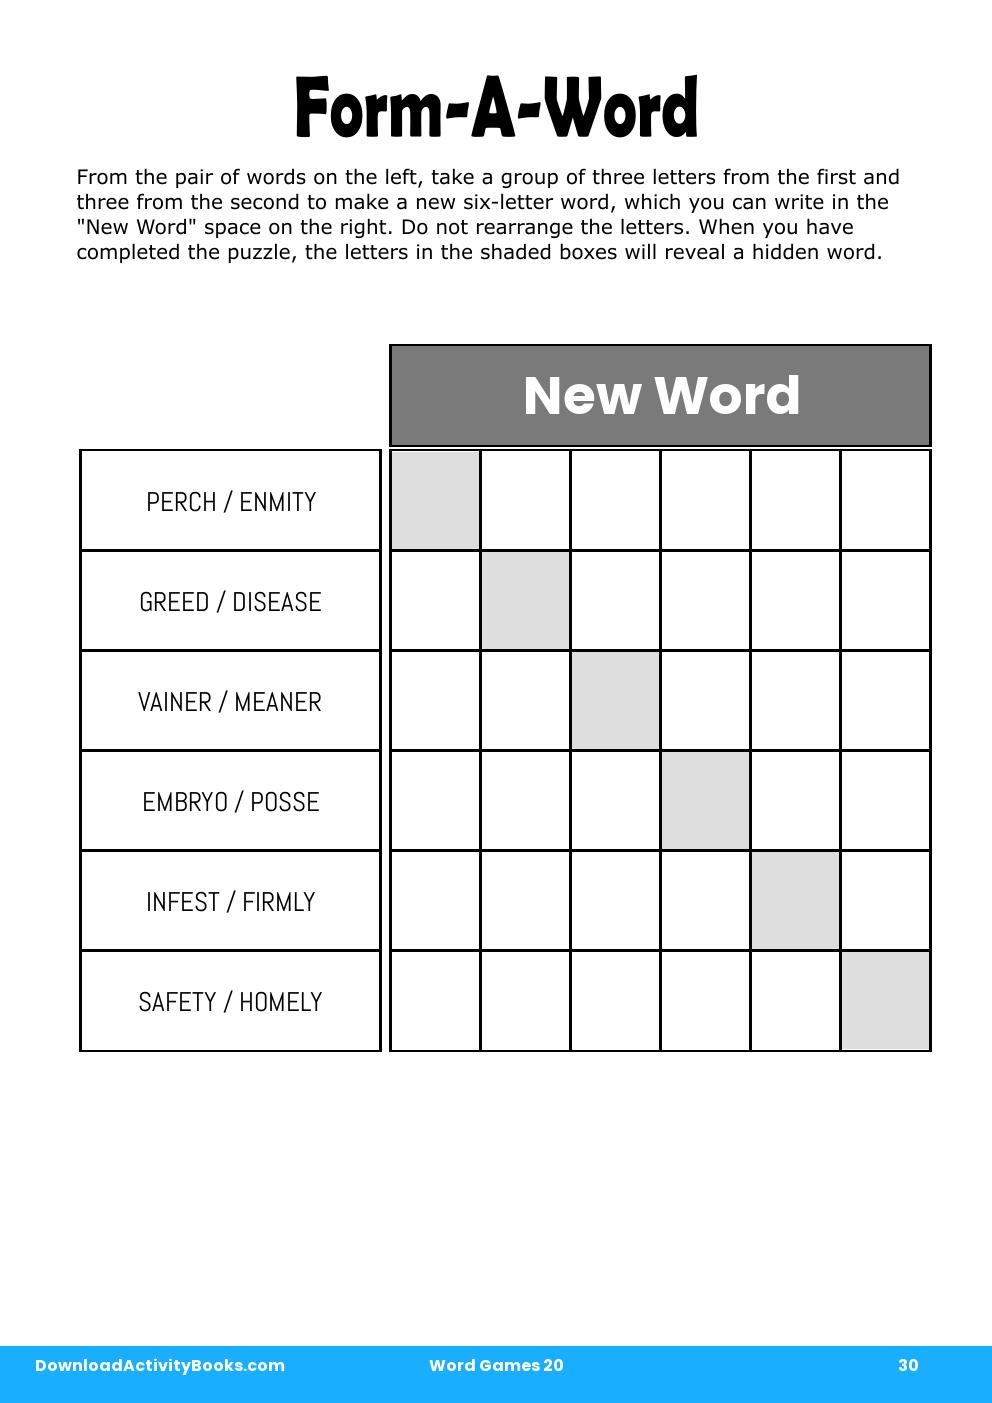 Form-A-Word in Word Games 20